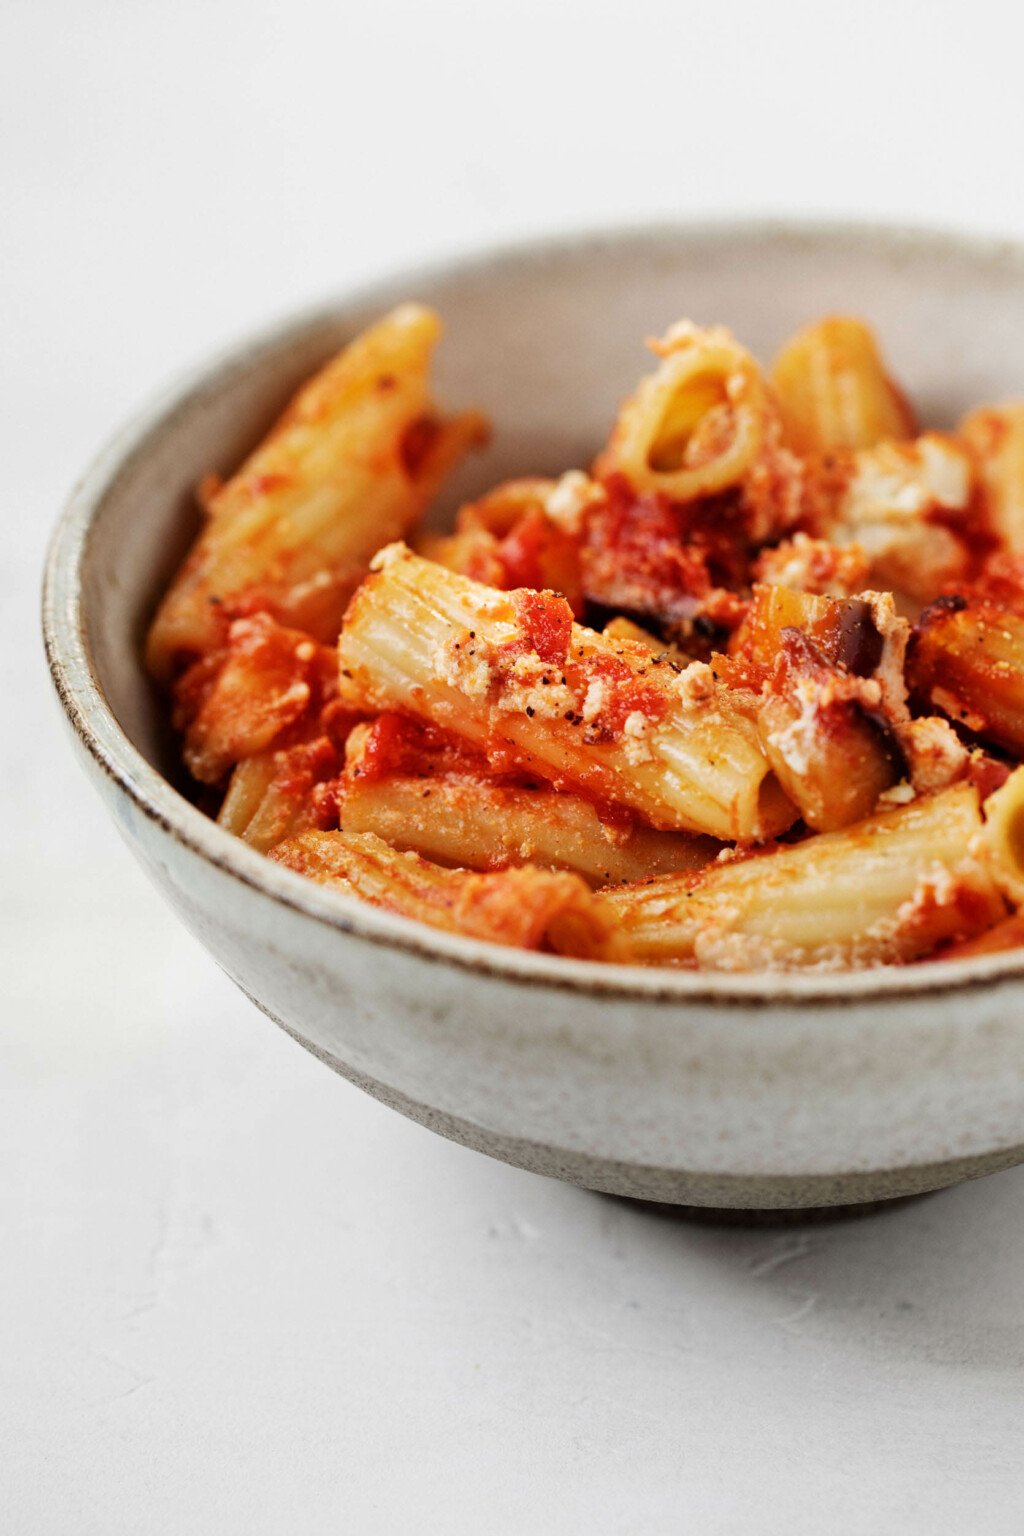 A round, white gray ceramic bowl is filled with a baked rigatoni pasta.